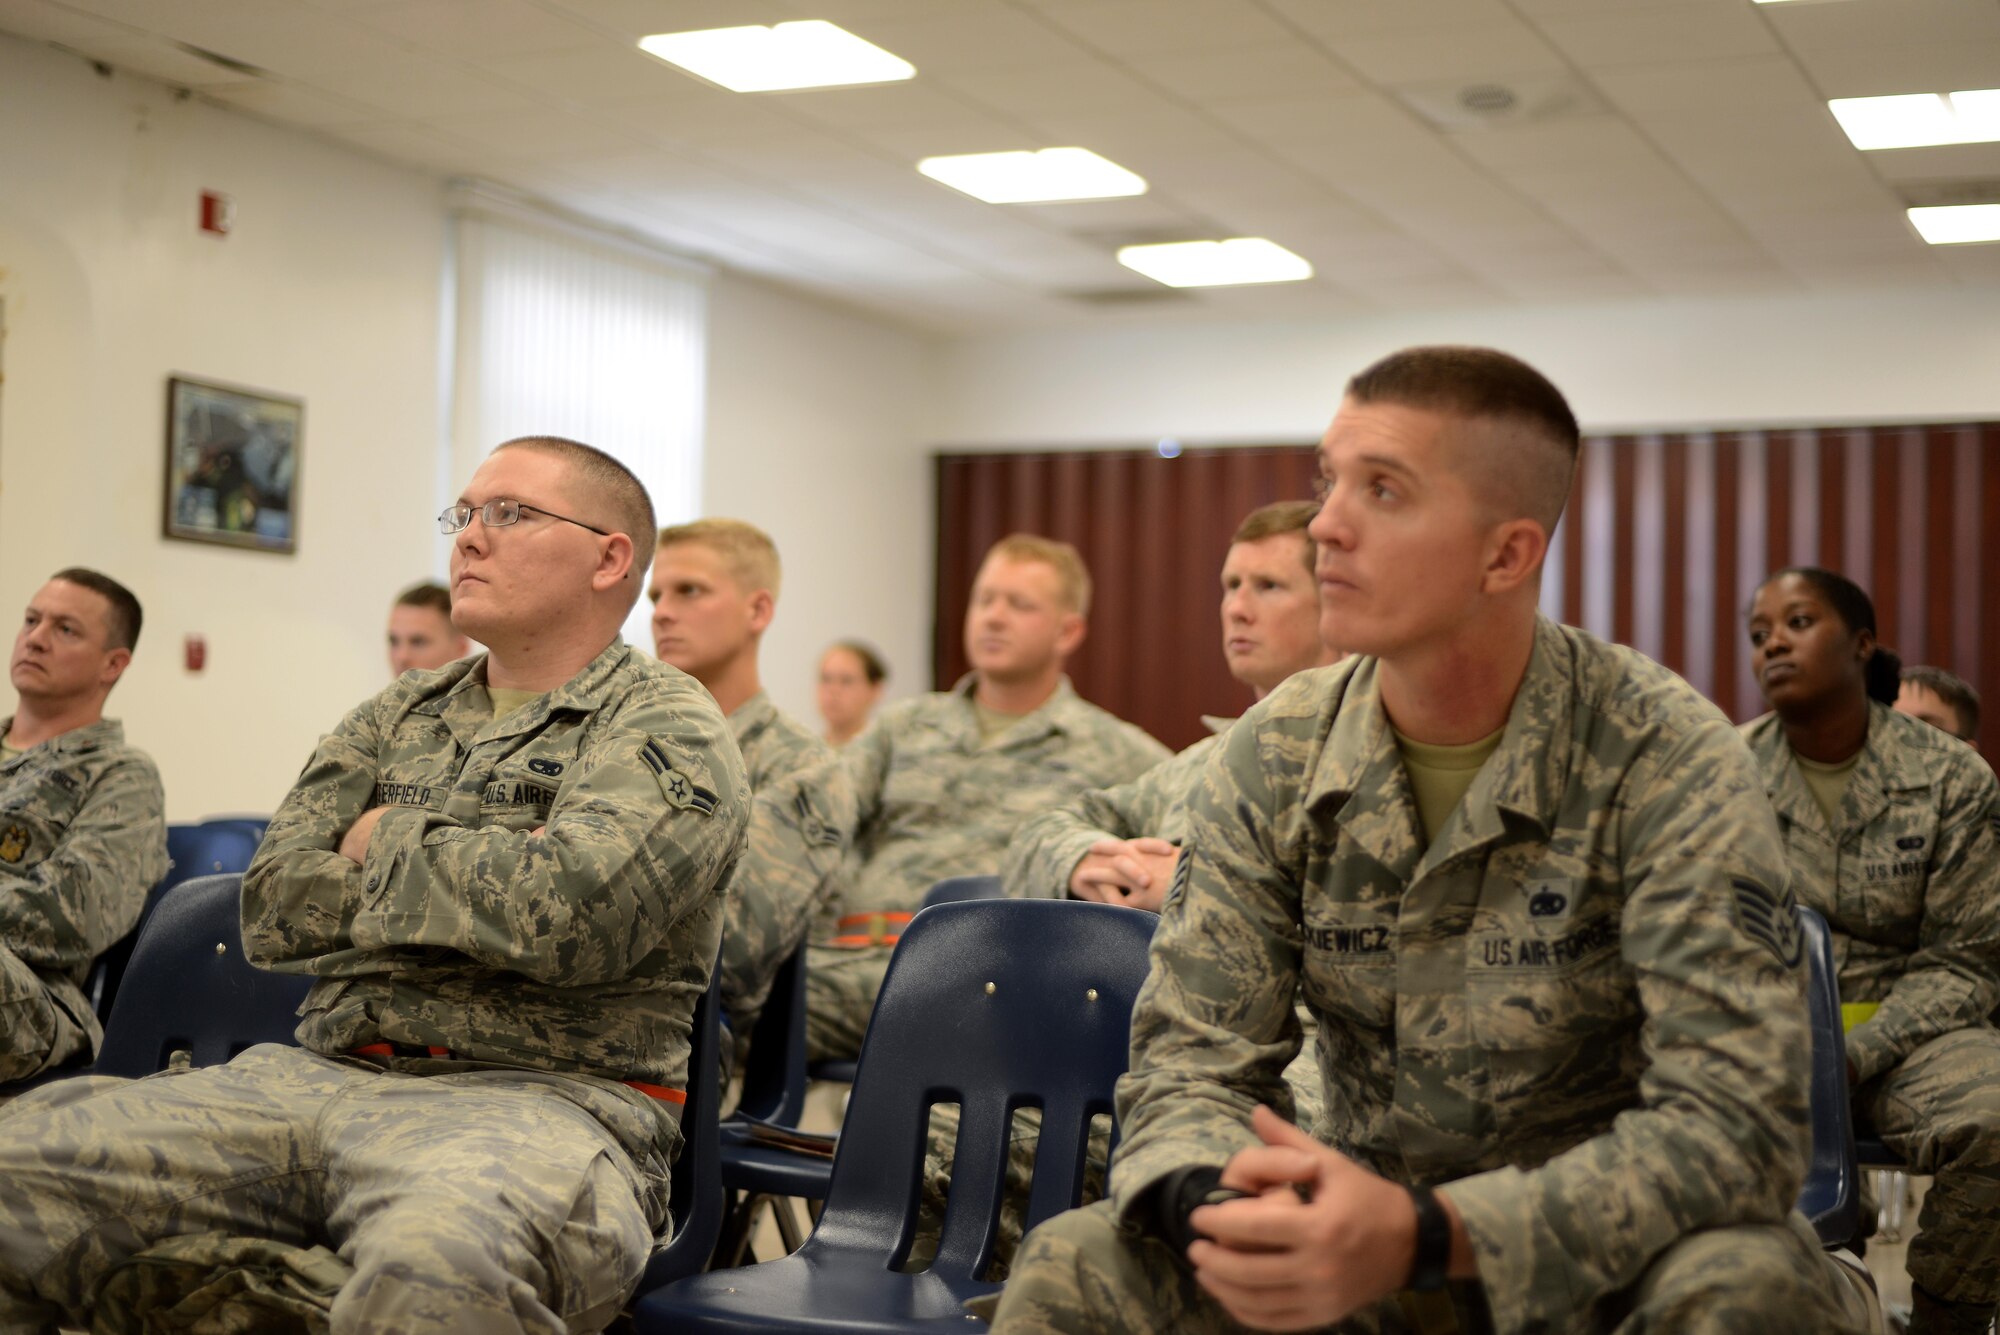 Members of Team MacDill attend pre-deployment briefings during a mobility exercise at MacDill Air Force Base, Fla., Aug. 16, 2016. The briefings were designed to educate the Airmen on important topics prior to deployment. (U.S. Air Force Photo by Airman 1st Class Rito Smith)